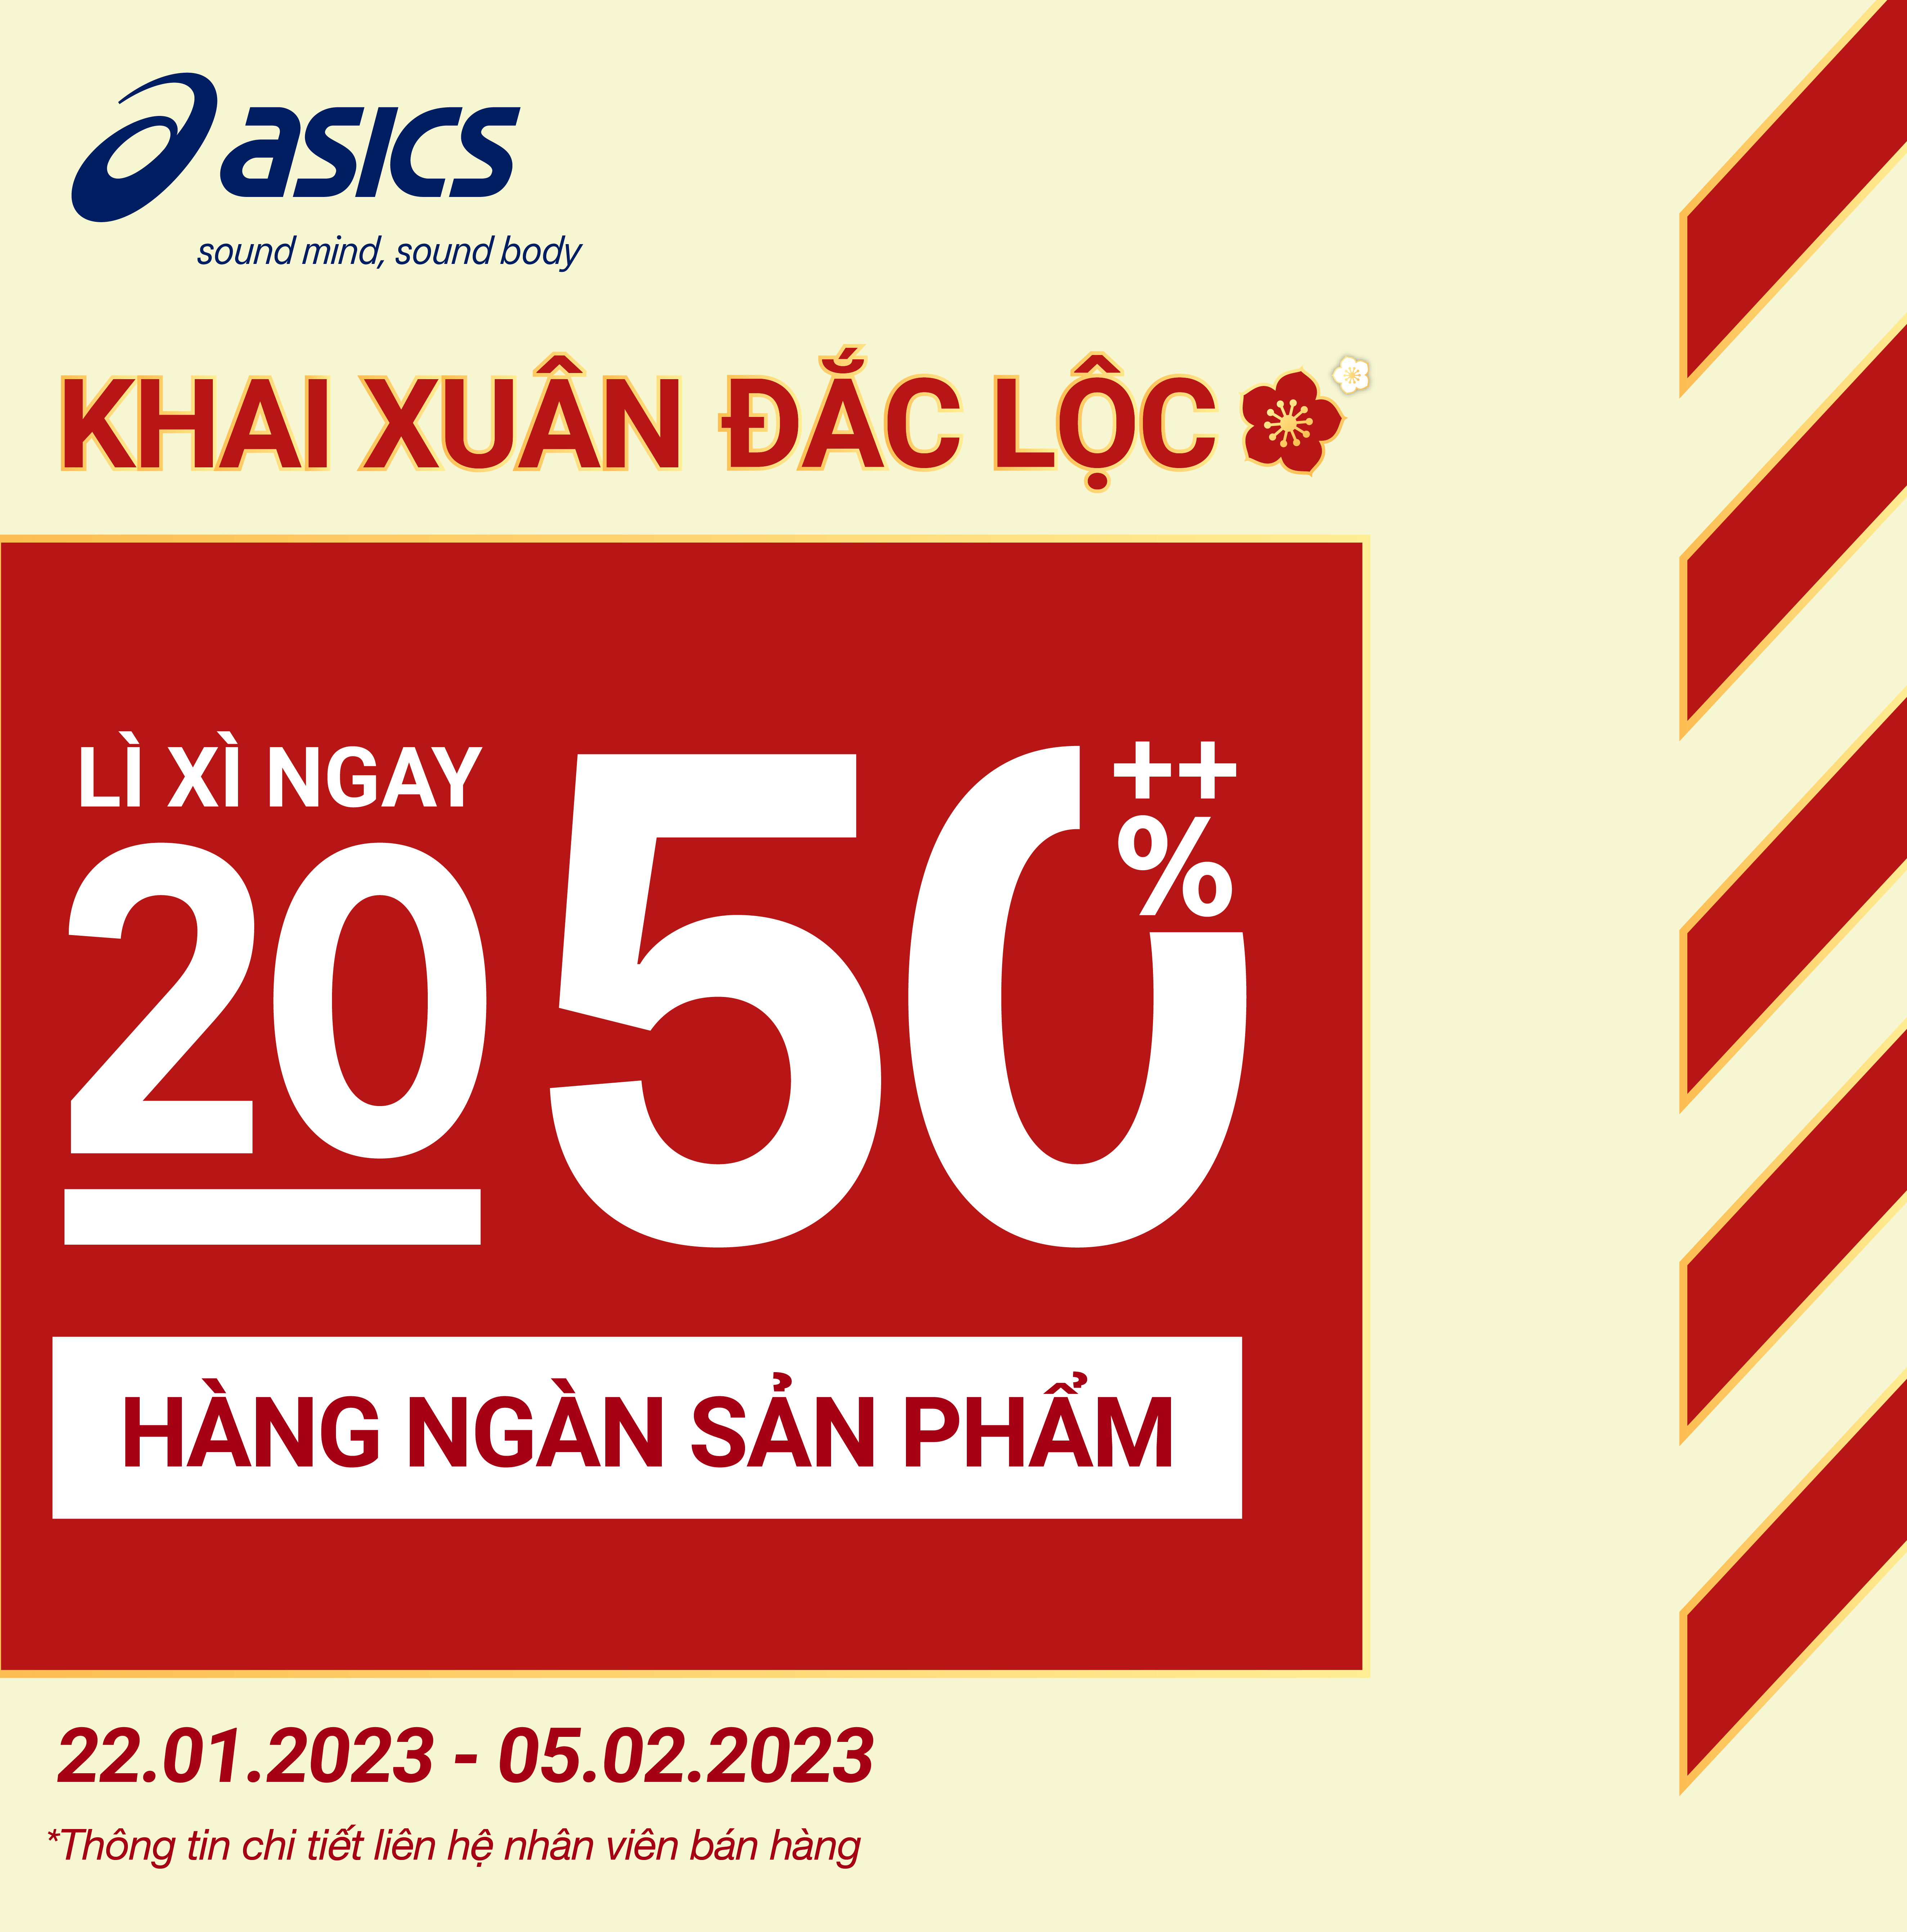 HAPPY LUNAR NEW YEAR - LUCKY MONEY FROM ASICS